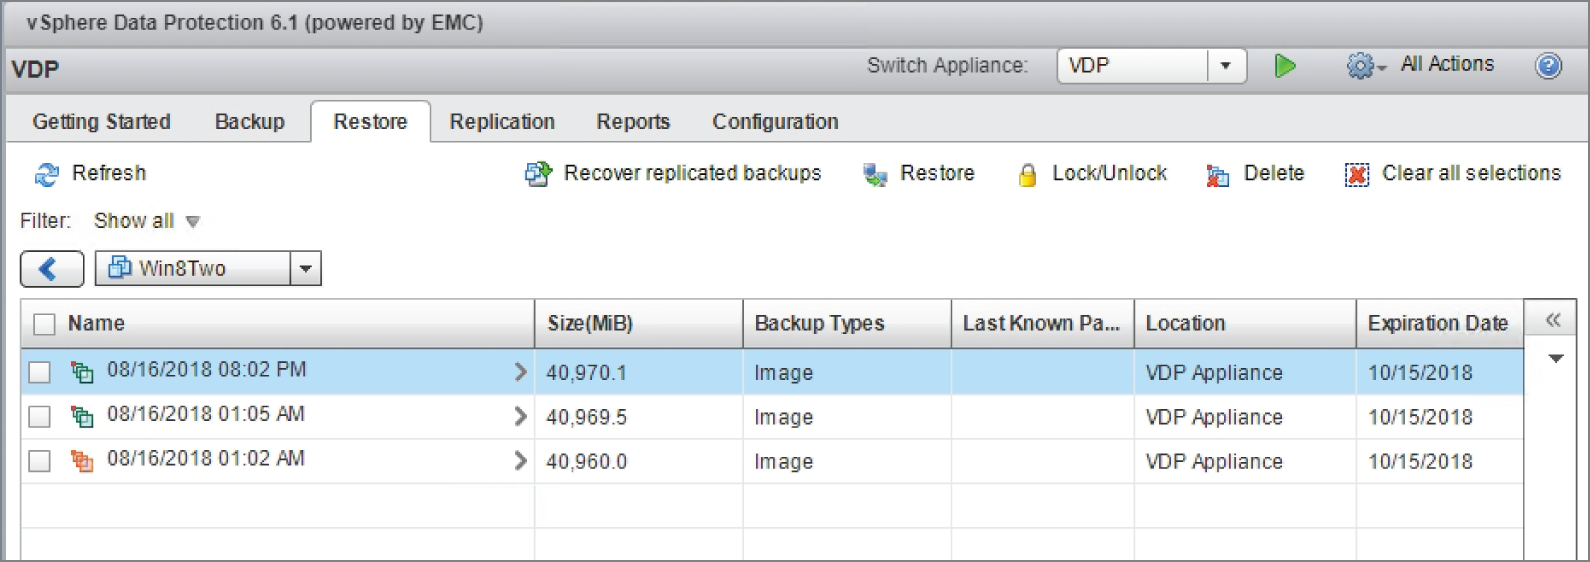 Snapshot of the backup jobs where the VM was not quiesced which have a red icon.